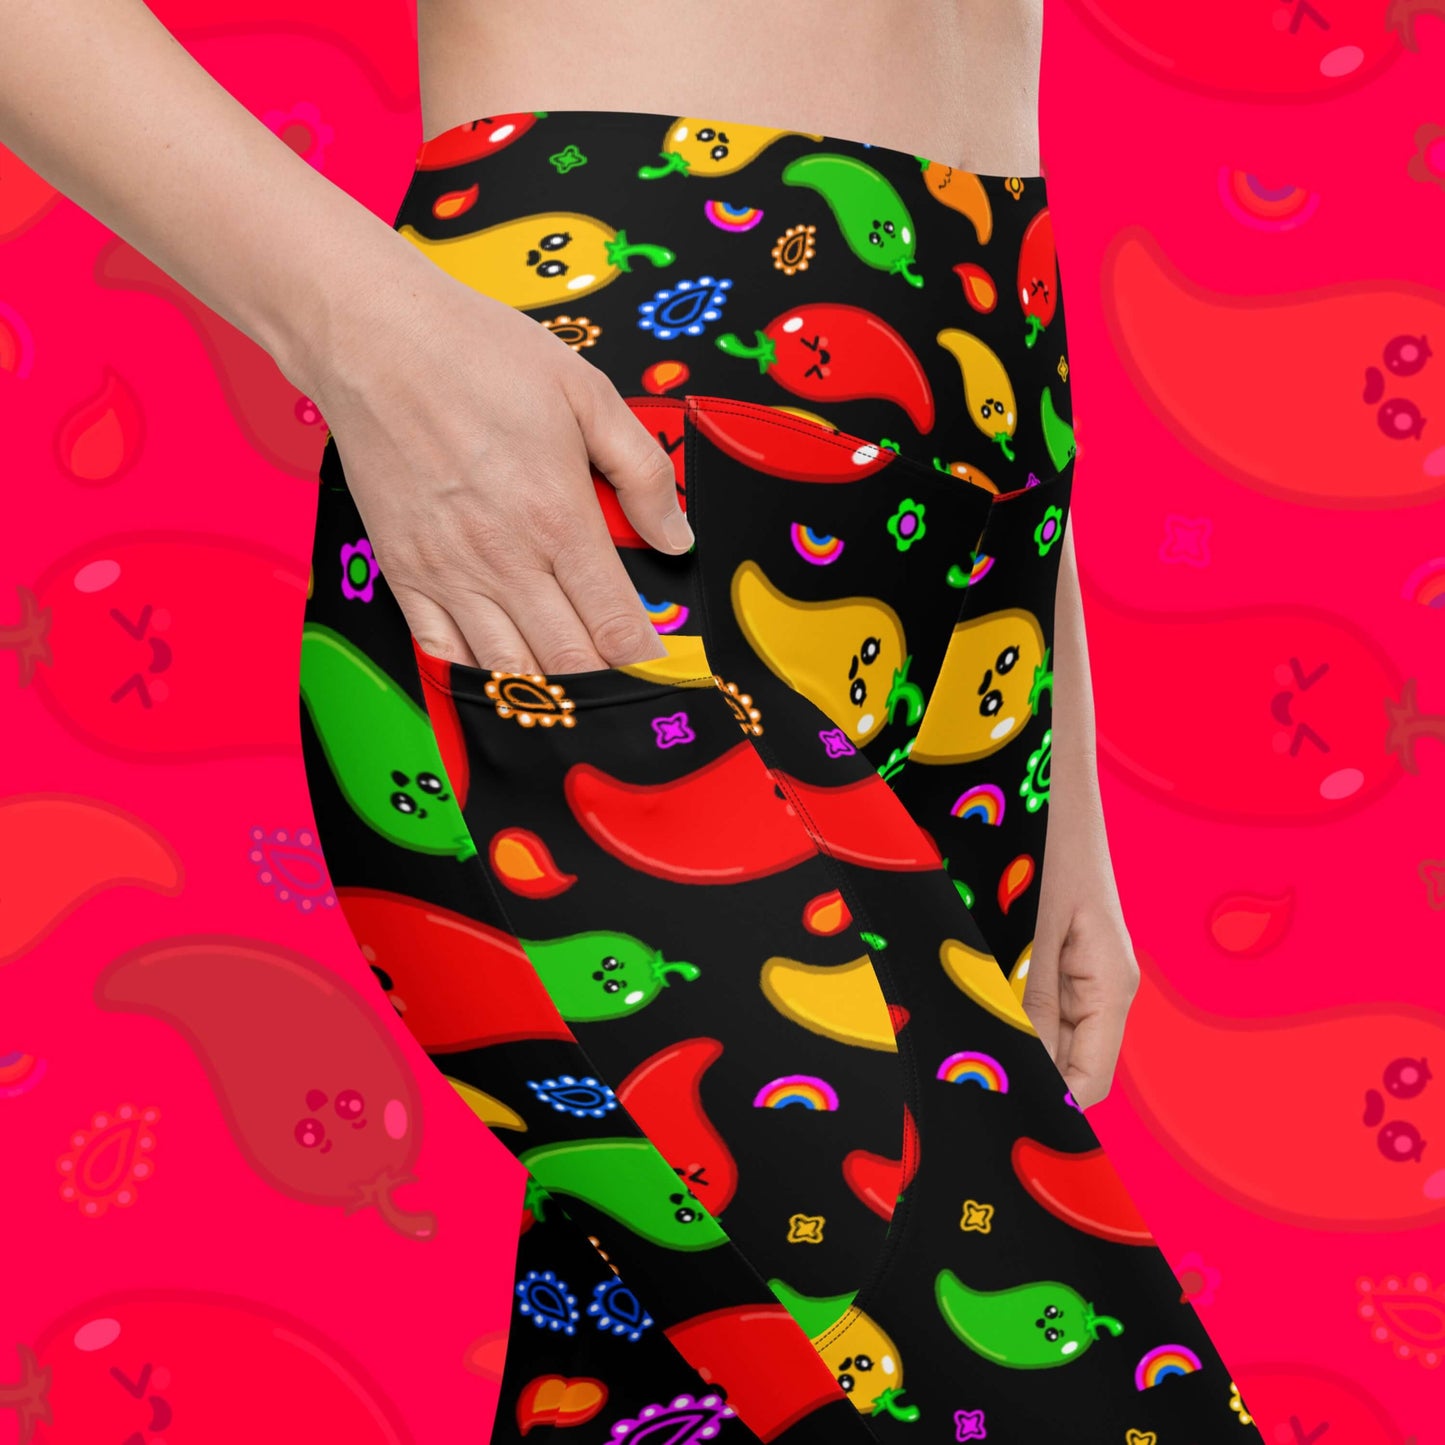 Black leggings with pockets with red, green, orange and yellow chilli peppers with cute faces on and various cute doodles around them shown on a model who has one hand in the leggings picket. The background of the photo is a faded close up of the print. The hand drawn design is raising awareness for neurodiversity. 